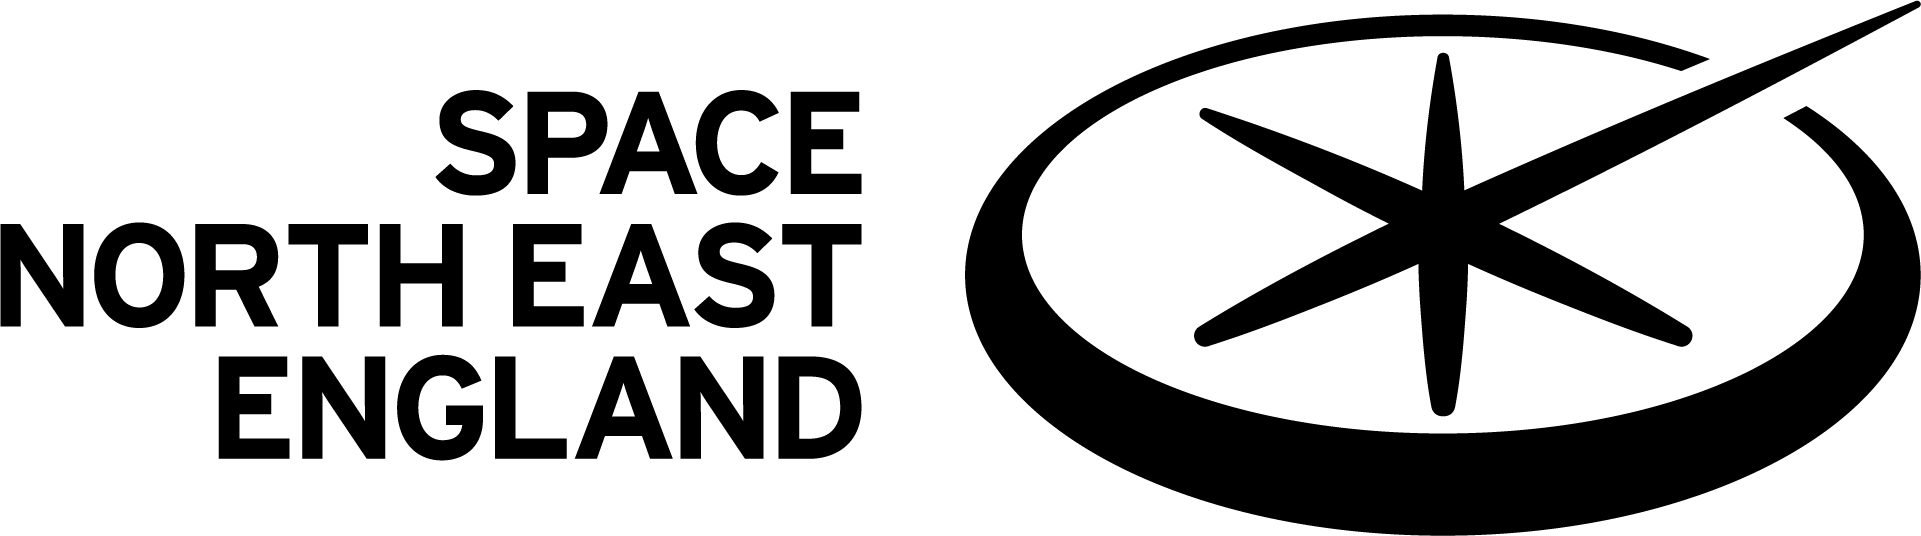 Space North East England logo